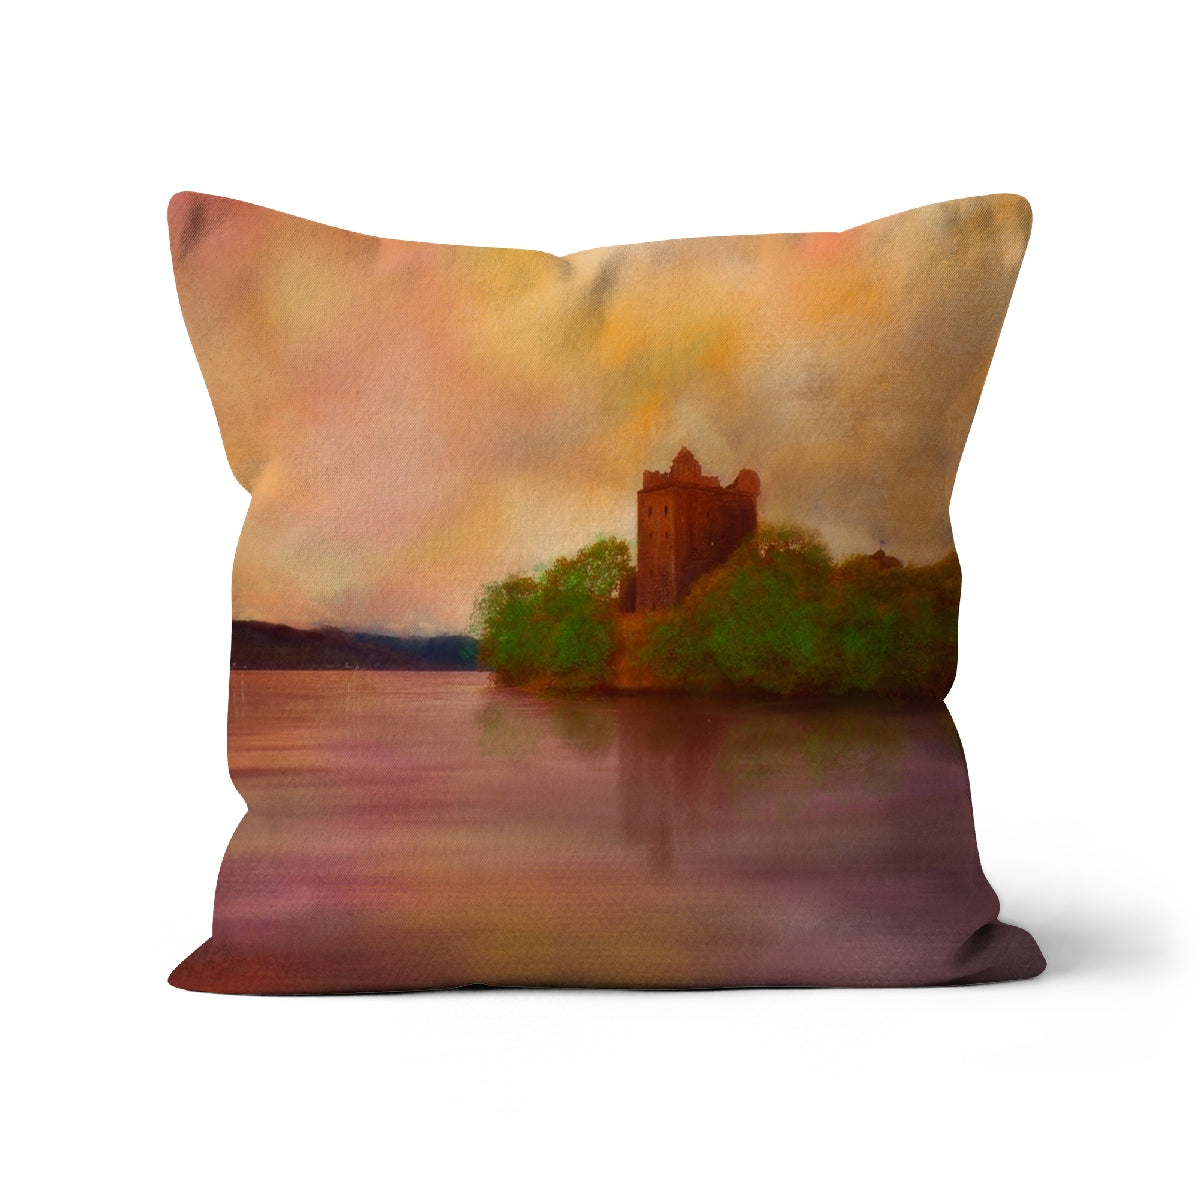 Urquhart Castle Art Gifts Cushion-Cushions-Historic & Iconic Scotland Art Gallery-Canvas-22"x22"-Paintings, Prints, Homeware, Art Gifts From Scotland By Scottish Artist Kevin Hunter